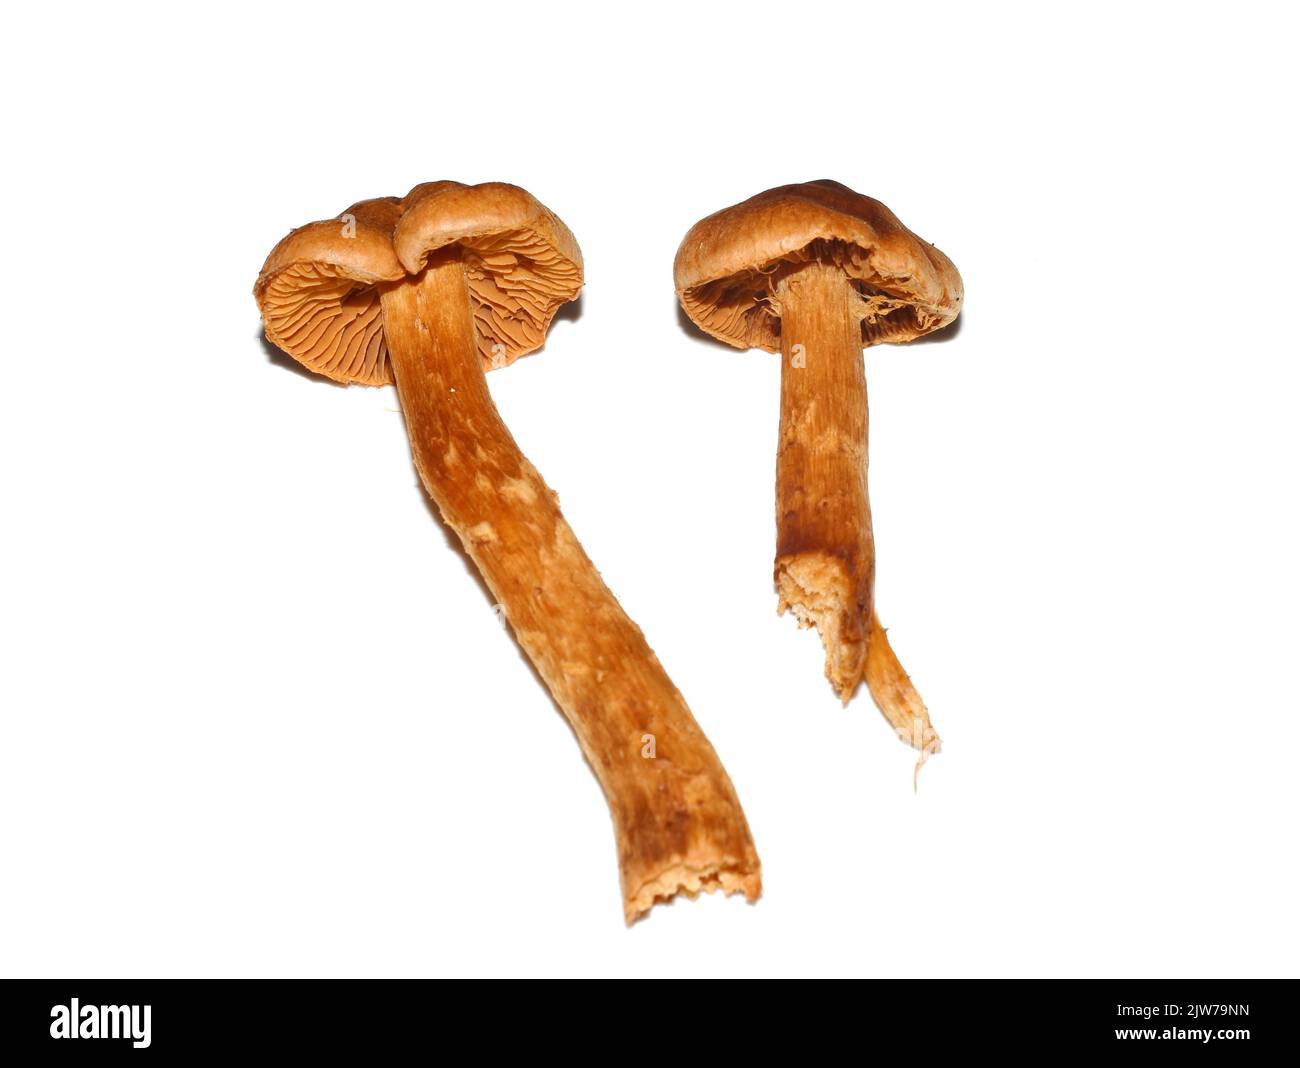 The higly toxic deadly webcap Cortinarius rubellus isolated on white background Stock Photo